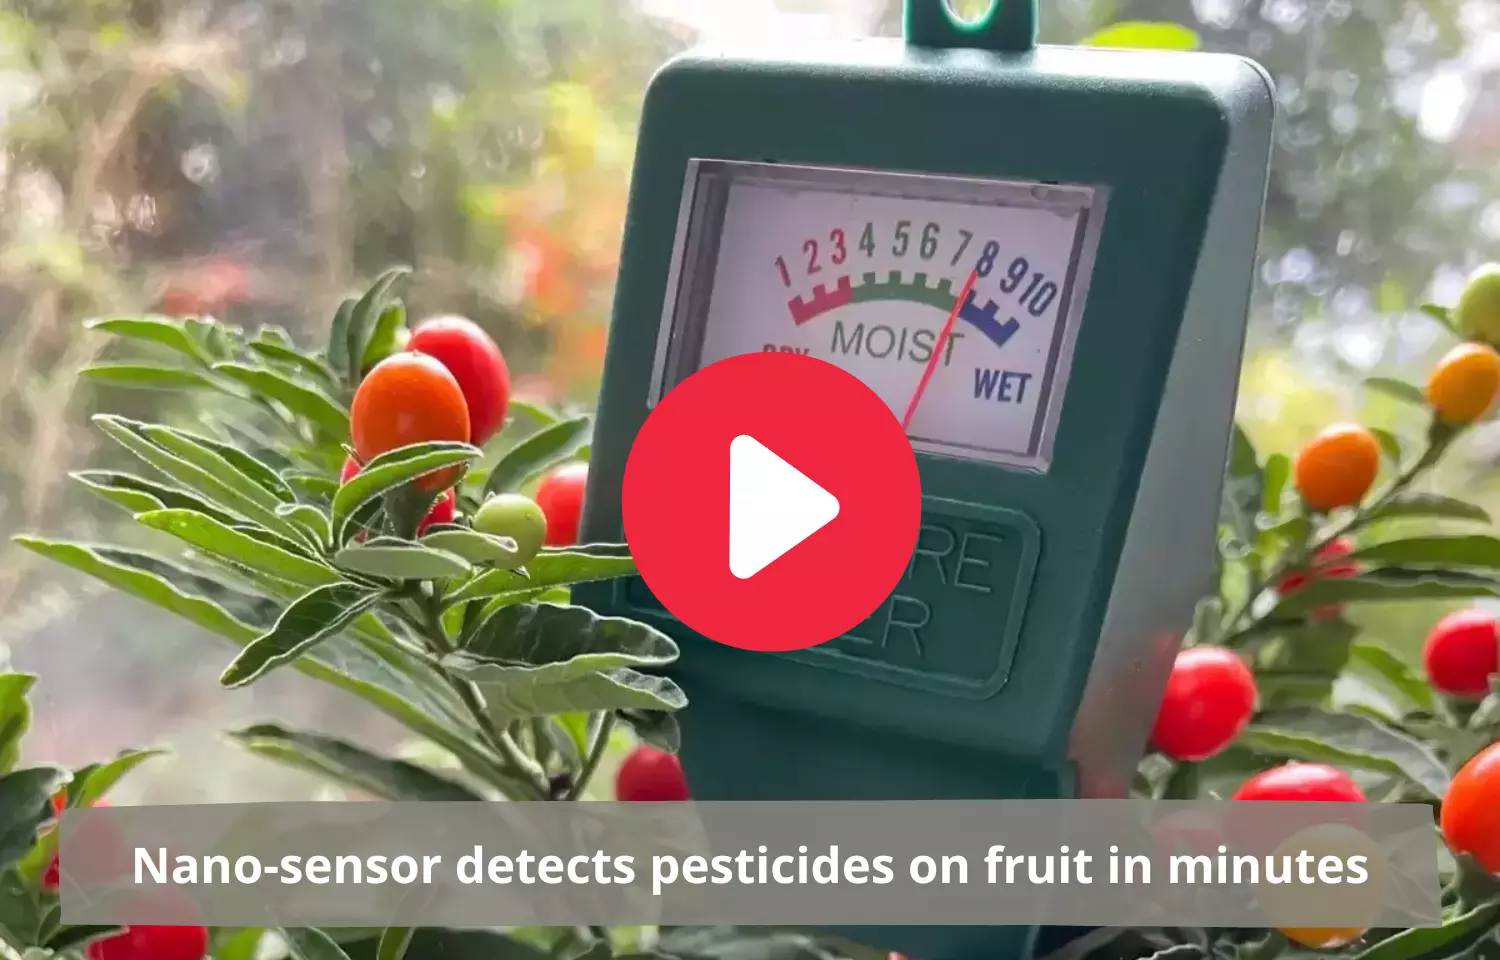 Nano-sensor detects pesticides on fruit in minutes